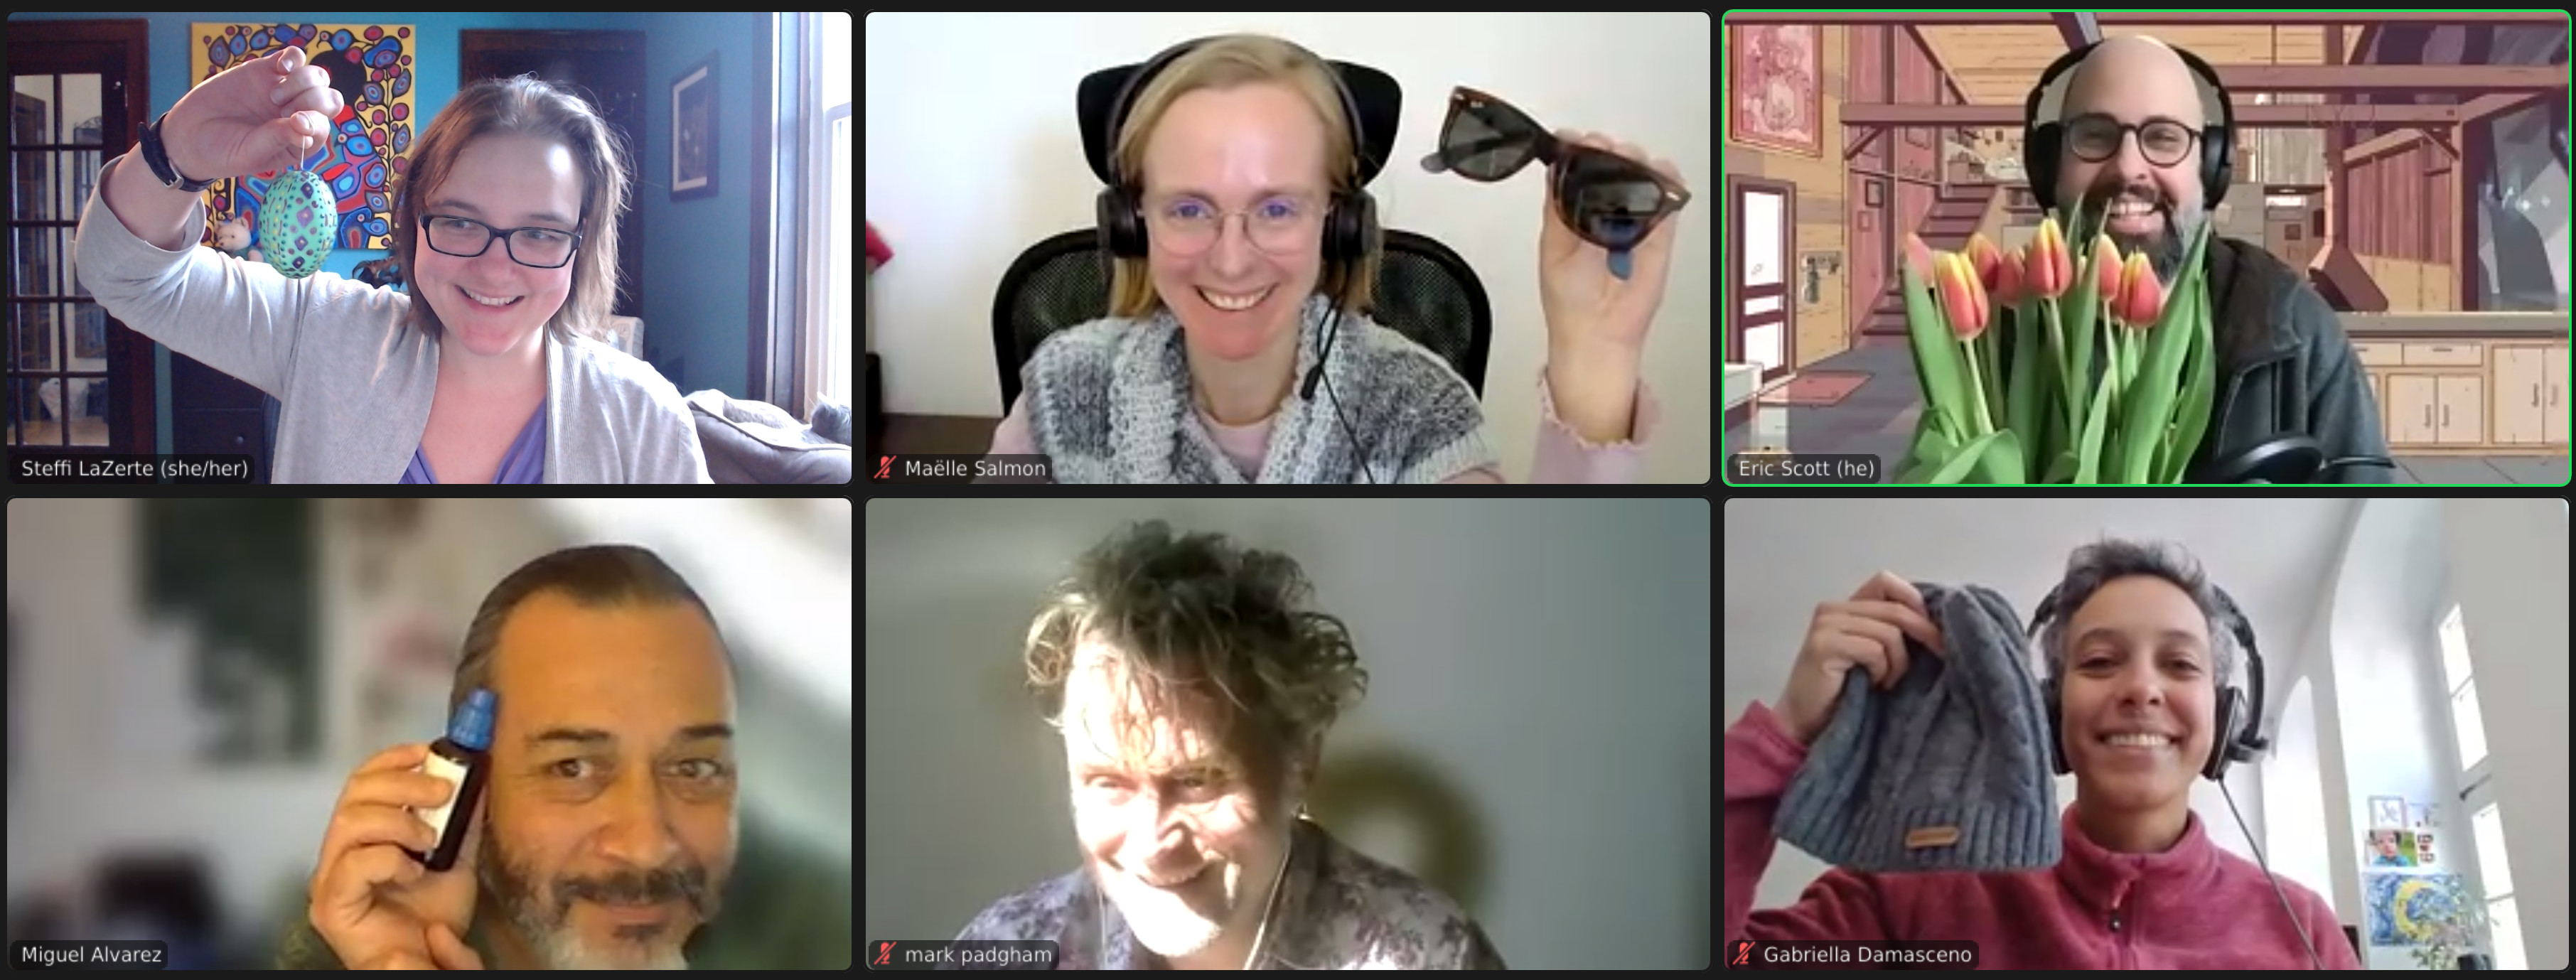 A screenshot of a Zoom meeting showing 6 different video participants each holding something different: Decorated Easter egg, Sunglasses, Tulips, Allergy medicine, Sunbeam, and Touque*